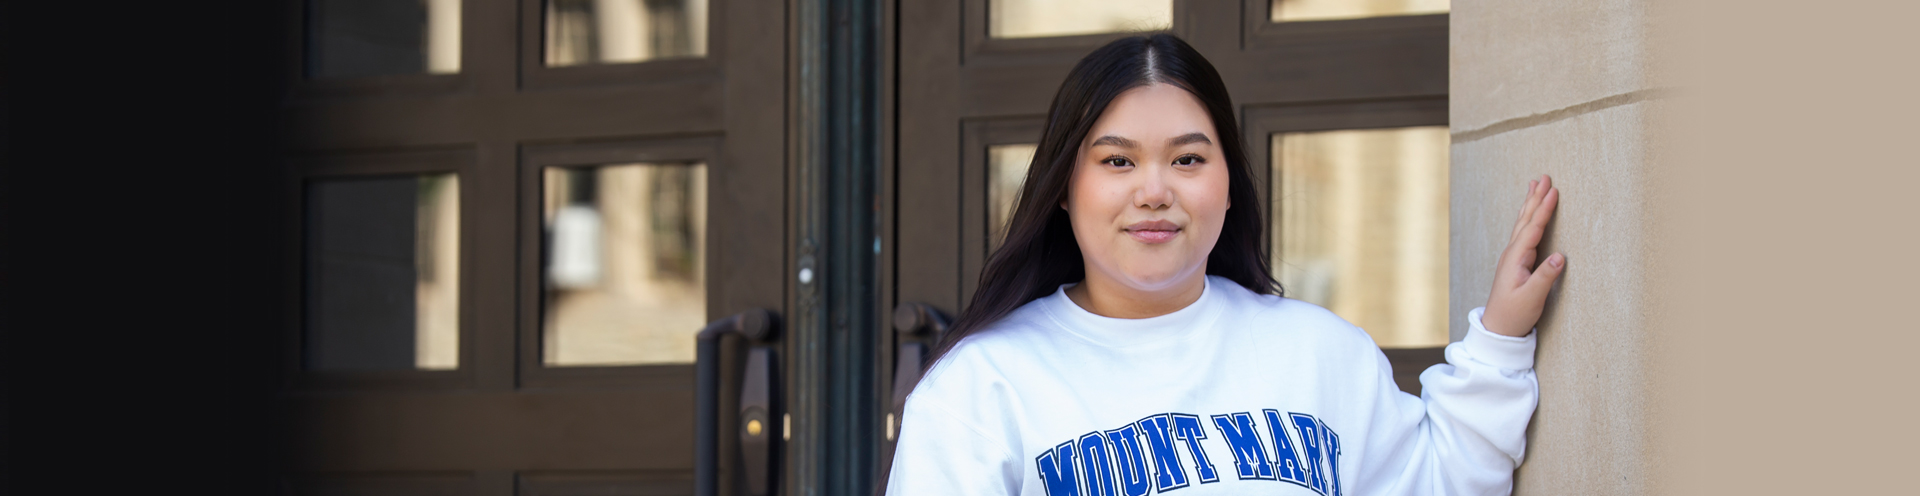 Why I chose Mount Mary: Four Students Share their Stories